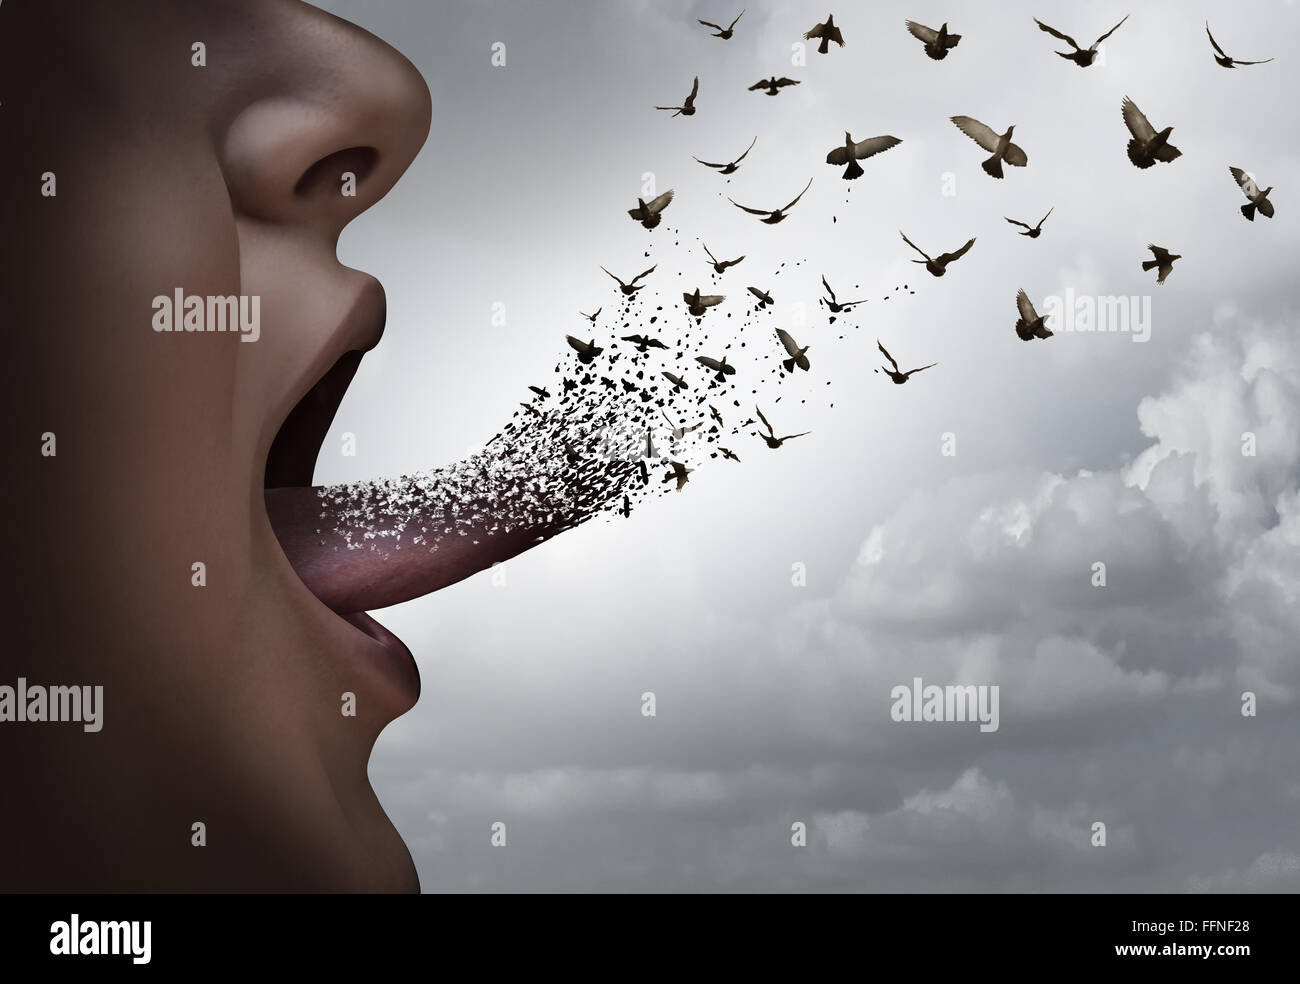 Communication concept a a person with an open mouth voicing an idea with a tongue transforming into flying birds as a thought distribution metaphor for expression and marketing ideas. Stock Photo